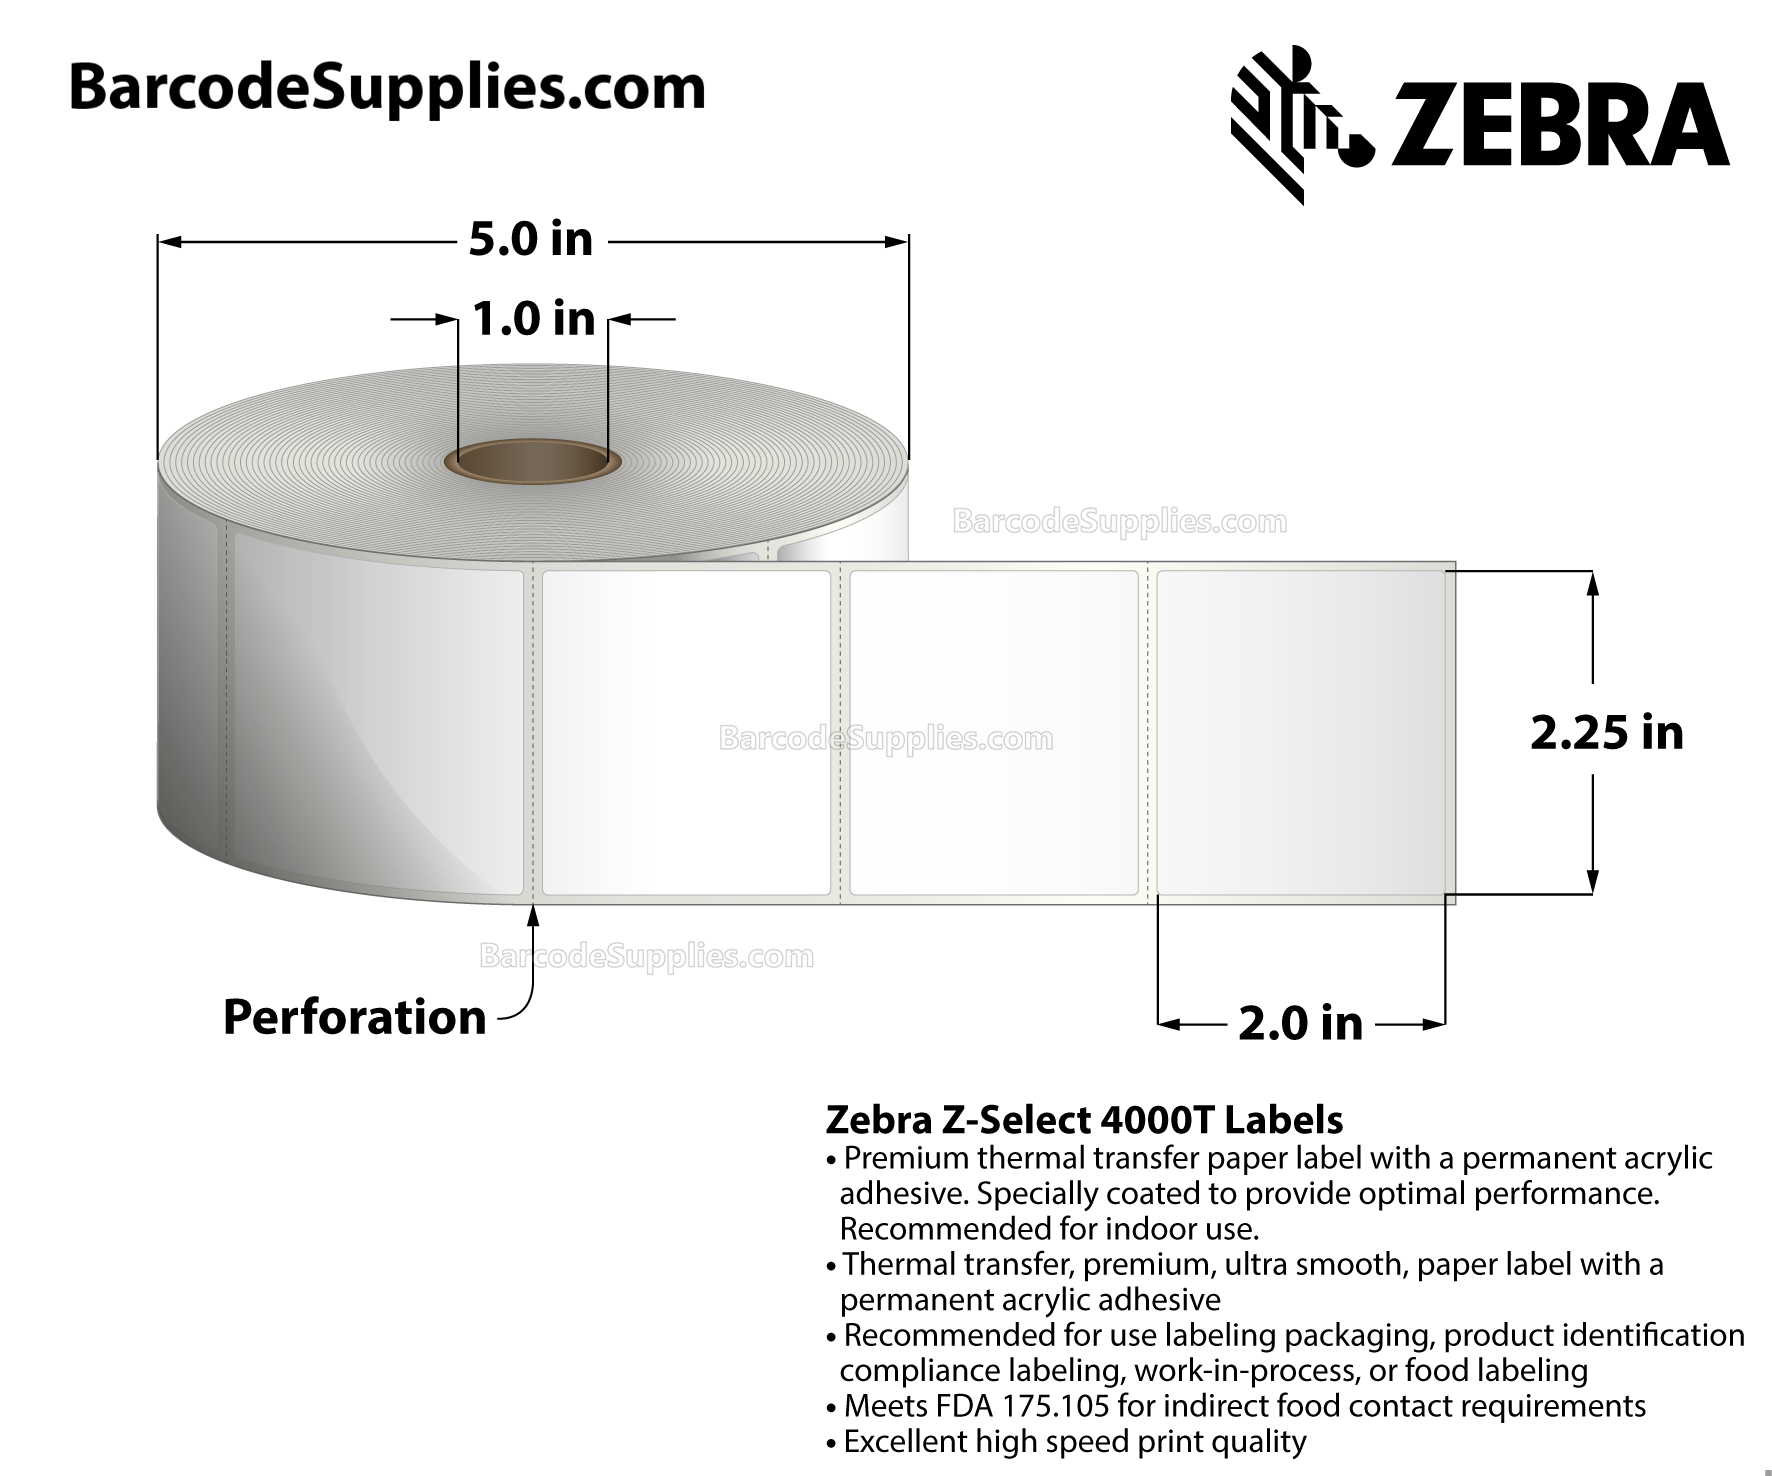 2.25 x 2 Thermal Transfer White Z-Select 4000T Labels With Permanent Adhesive - Perforated - 1370 Labels Per Roll - Carton Of 6 Rolls - 8220 Labels Total - MPN: 10009525